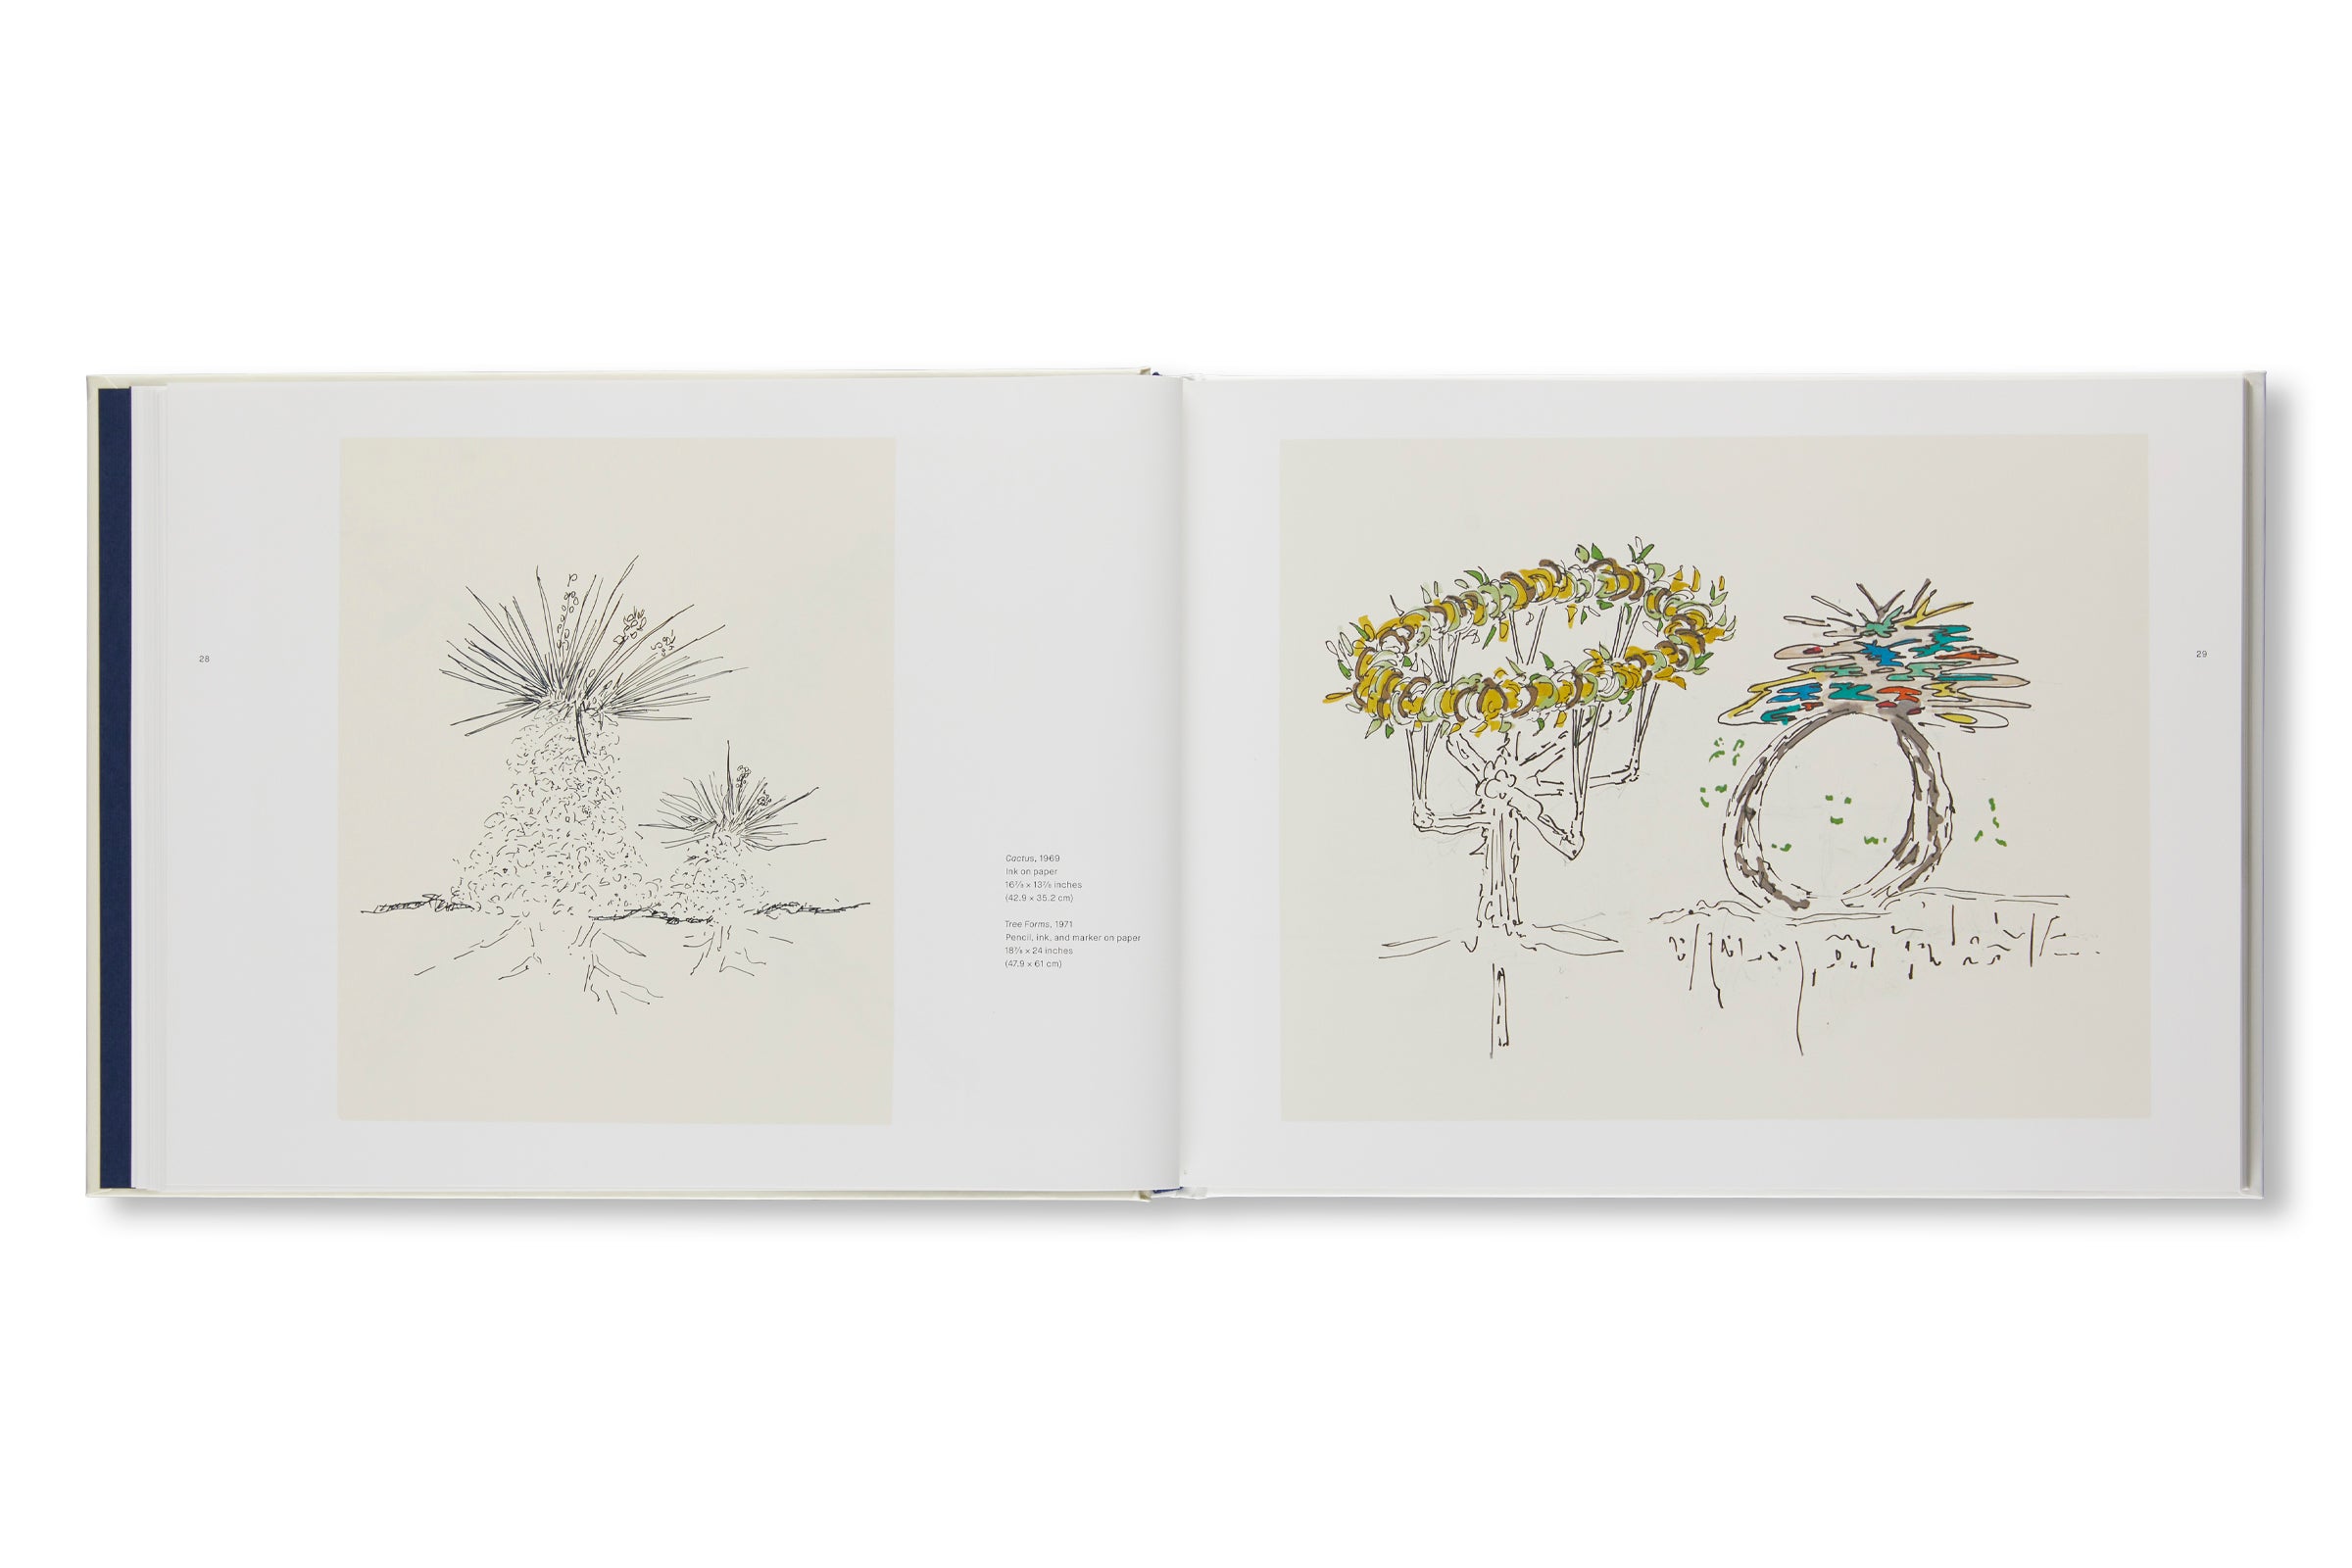 THE BEGINNING OF TREES AND THE END: DRAWINGS AND NOTEBOOKS by Gordon Matta-Clark